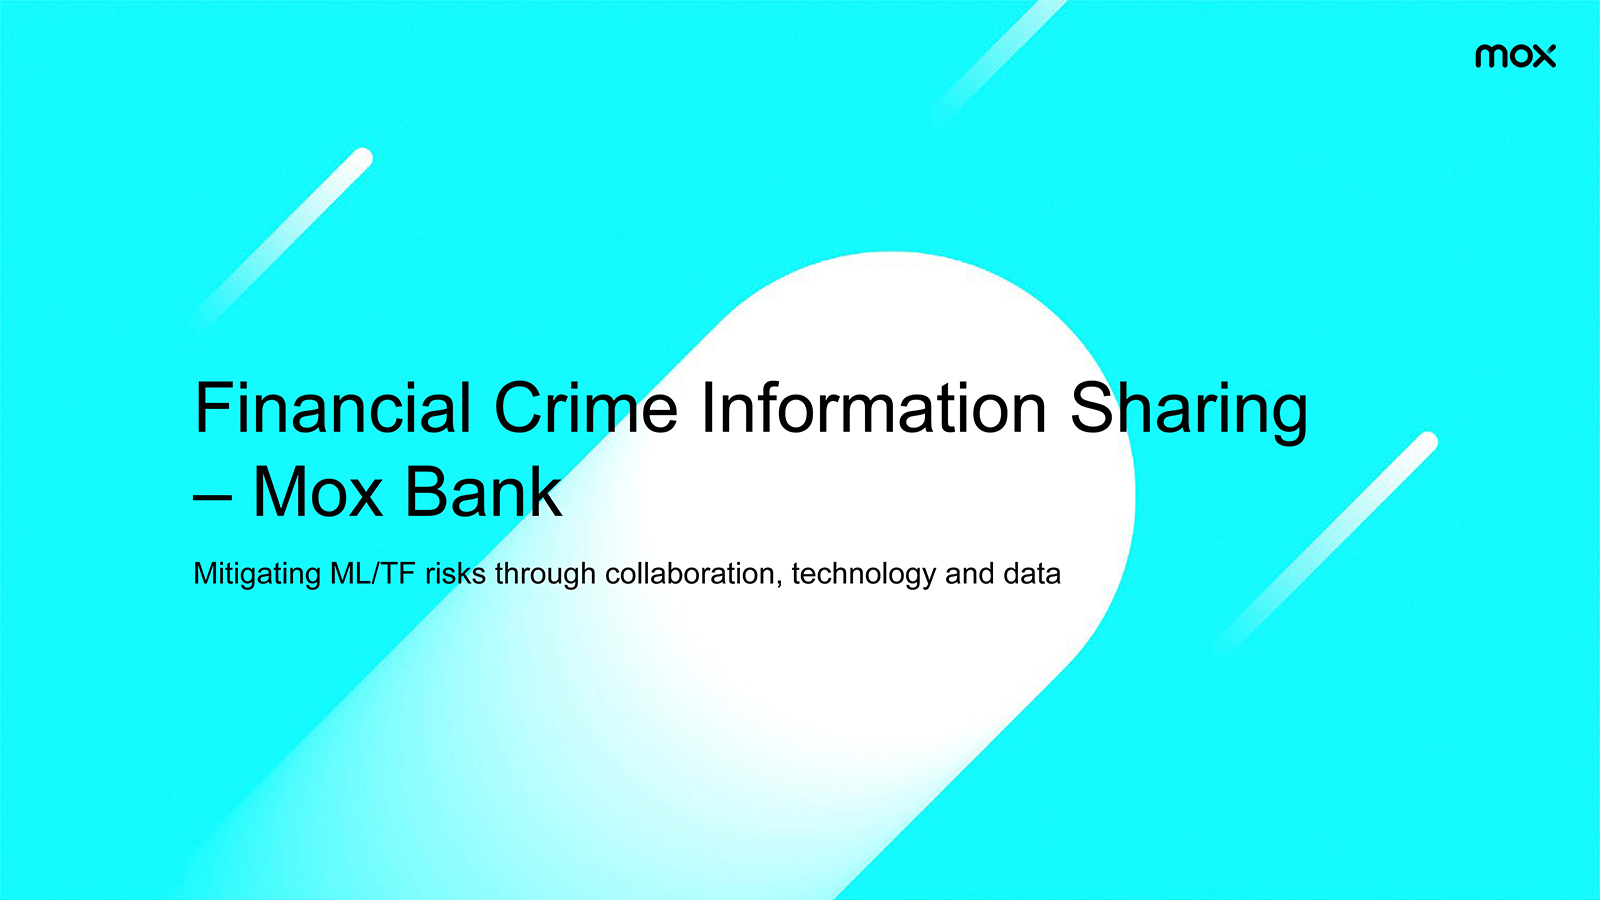 Financial Crime Information Sharing by Mox Bank